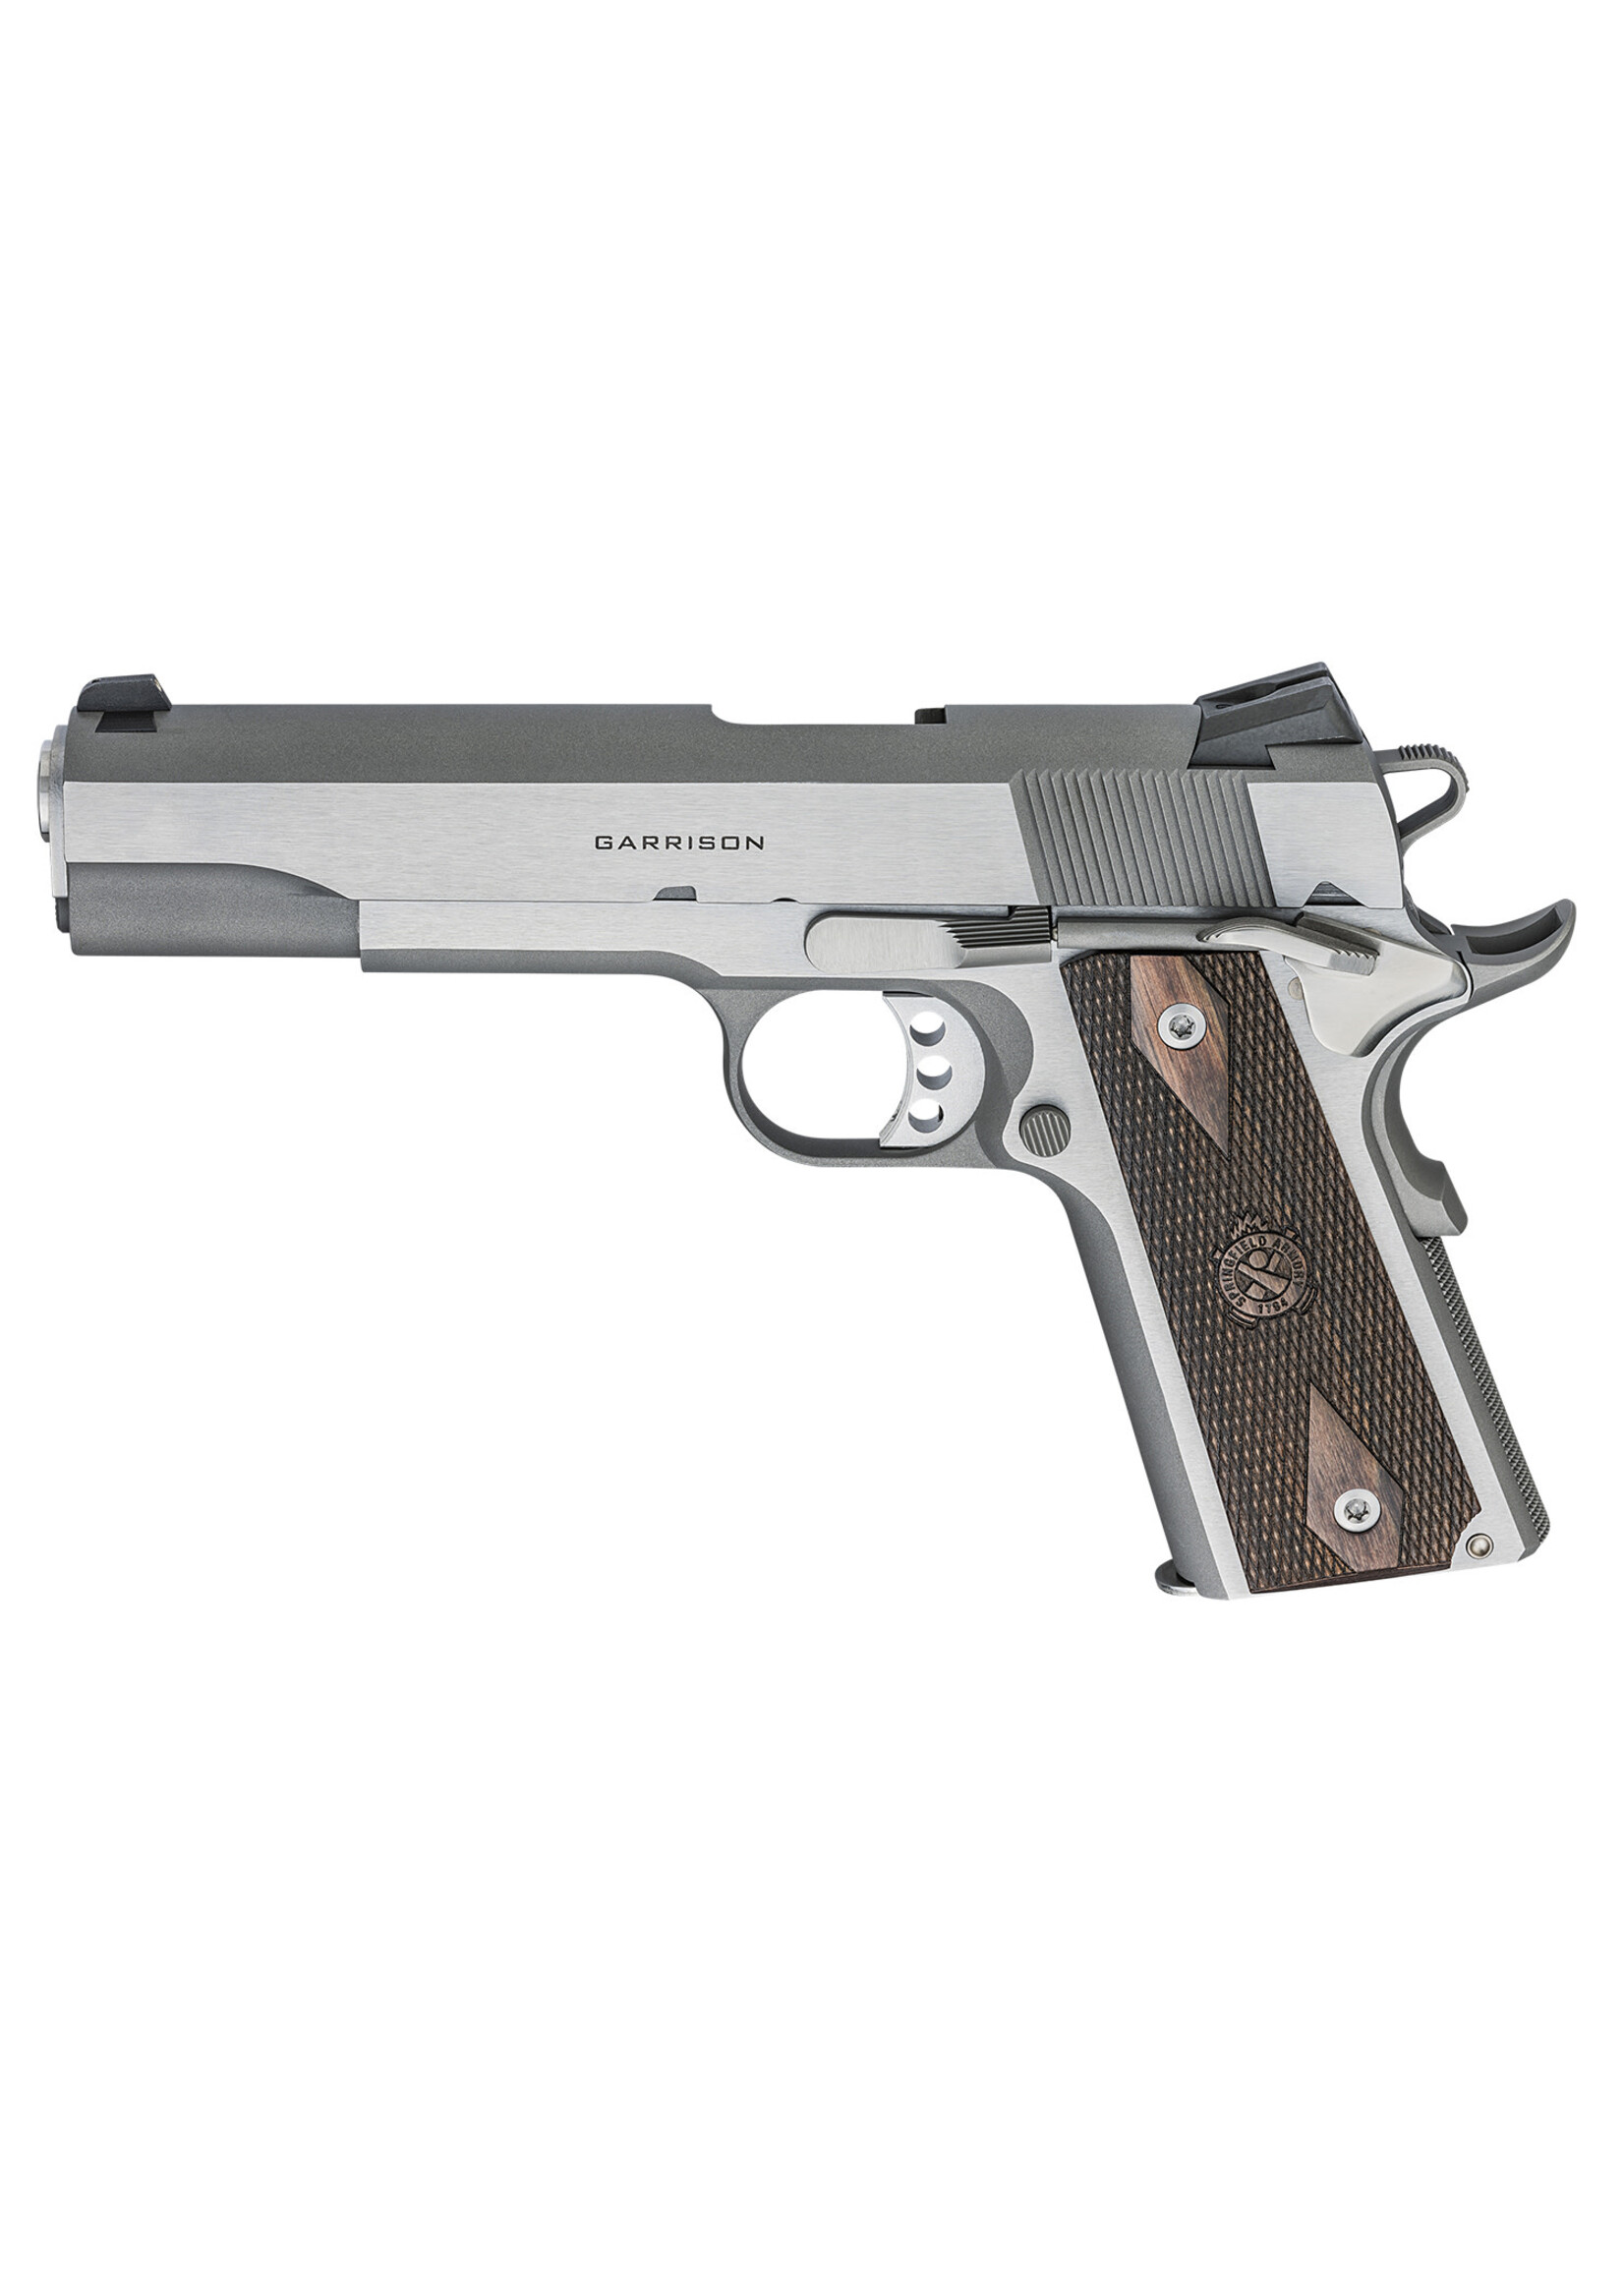 Springfield Armory Springfield Armory PX9420S 1911 Garrison 45 ACP 7+1, 5" Stainless Match Grade Steel Barrel, Stainless Steel Serrated Slide, Stainless Steel Frame w/Beavertail, Thin-Line Wood Grip, Right Hand